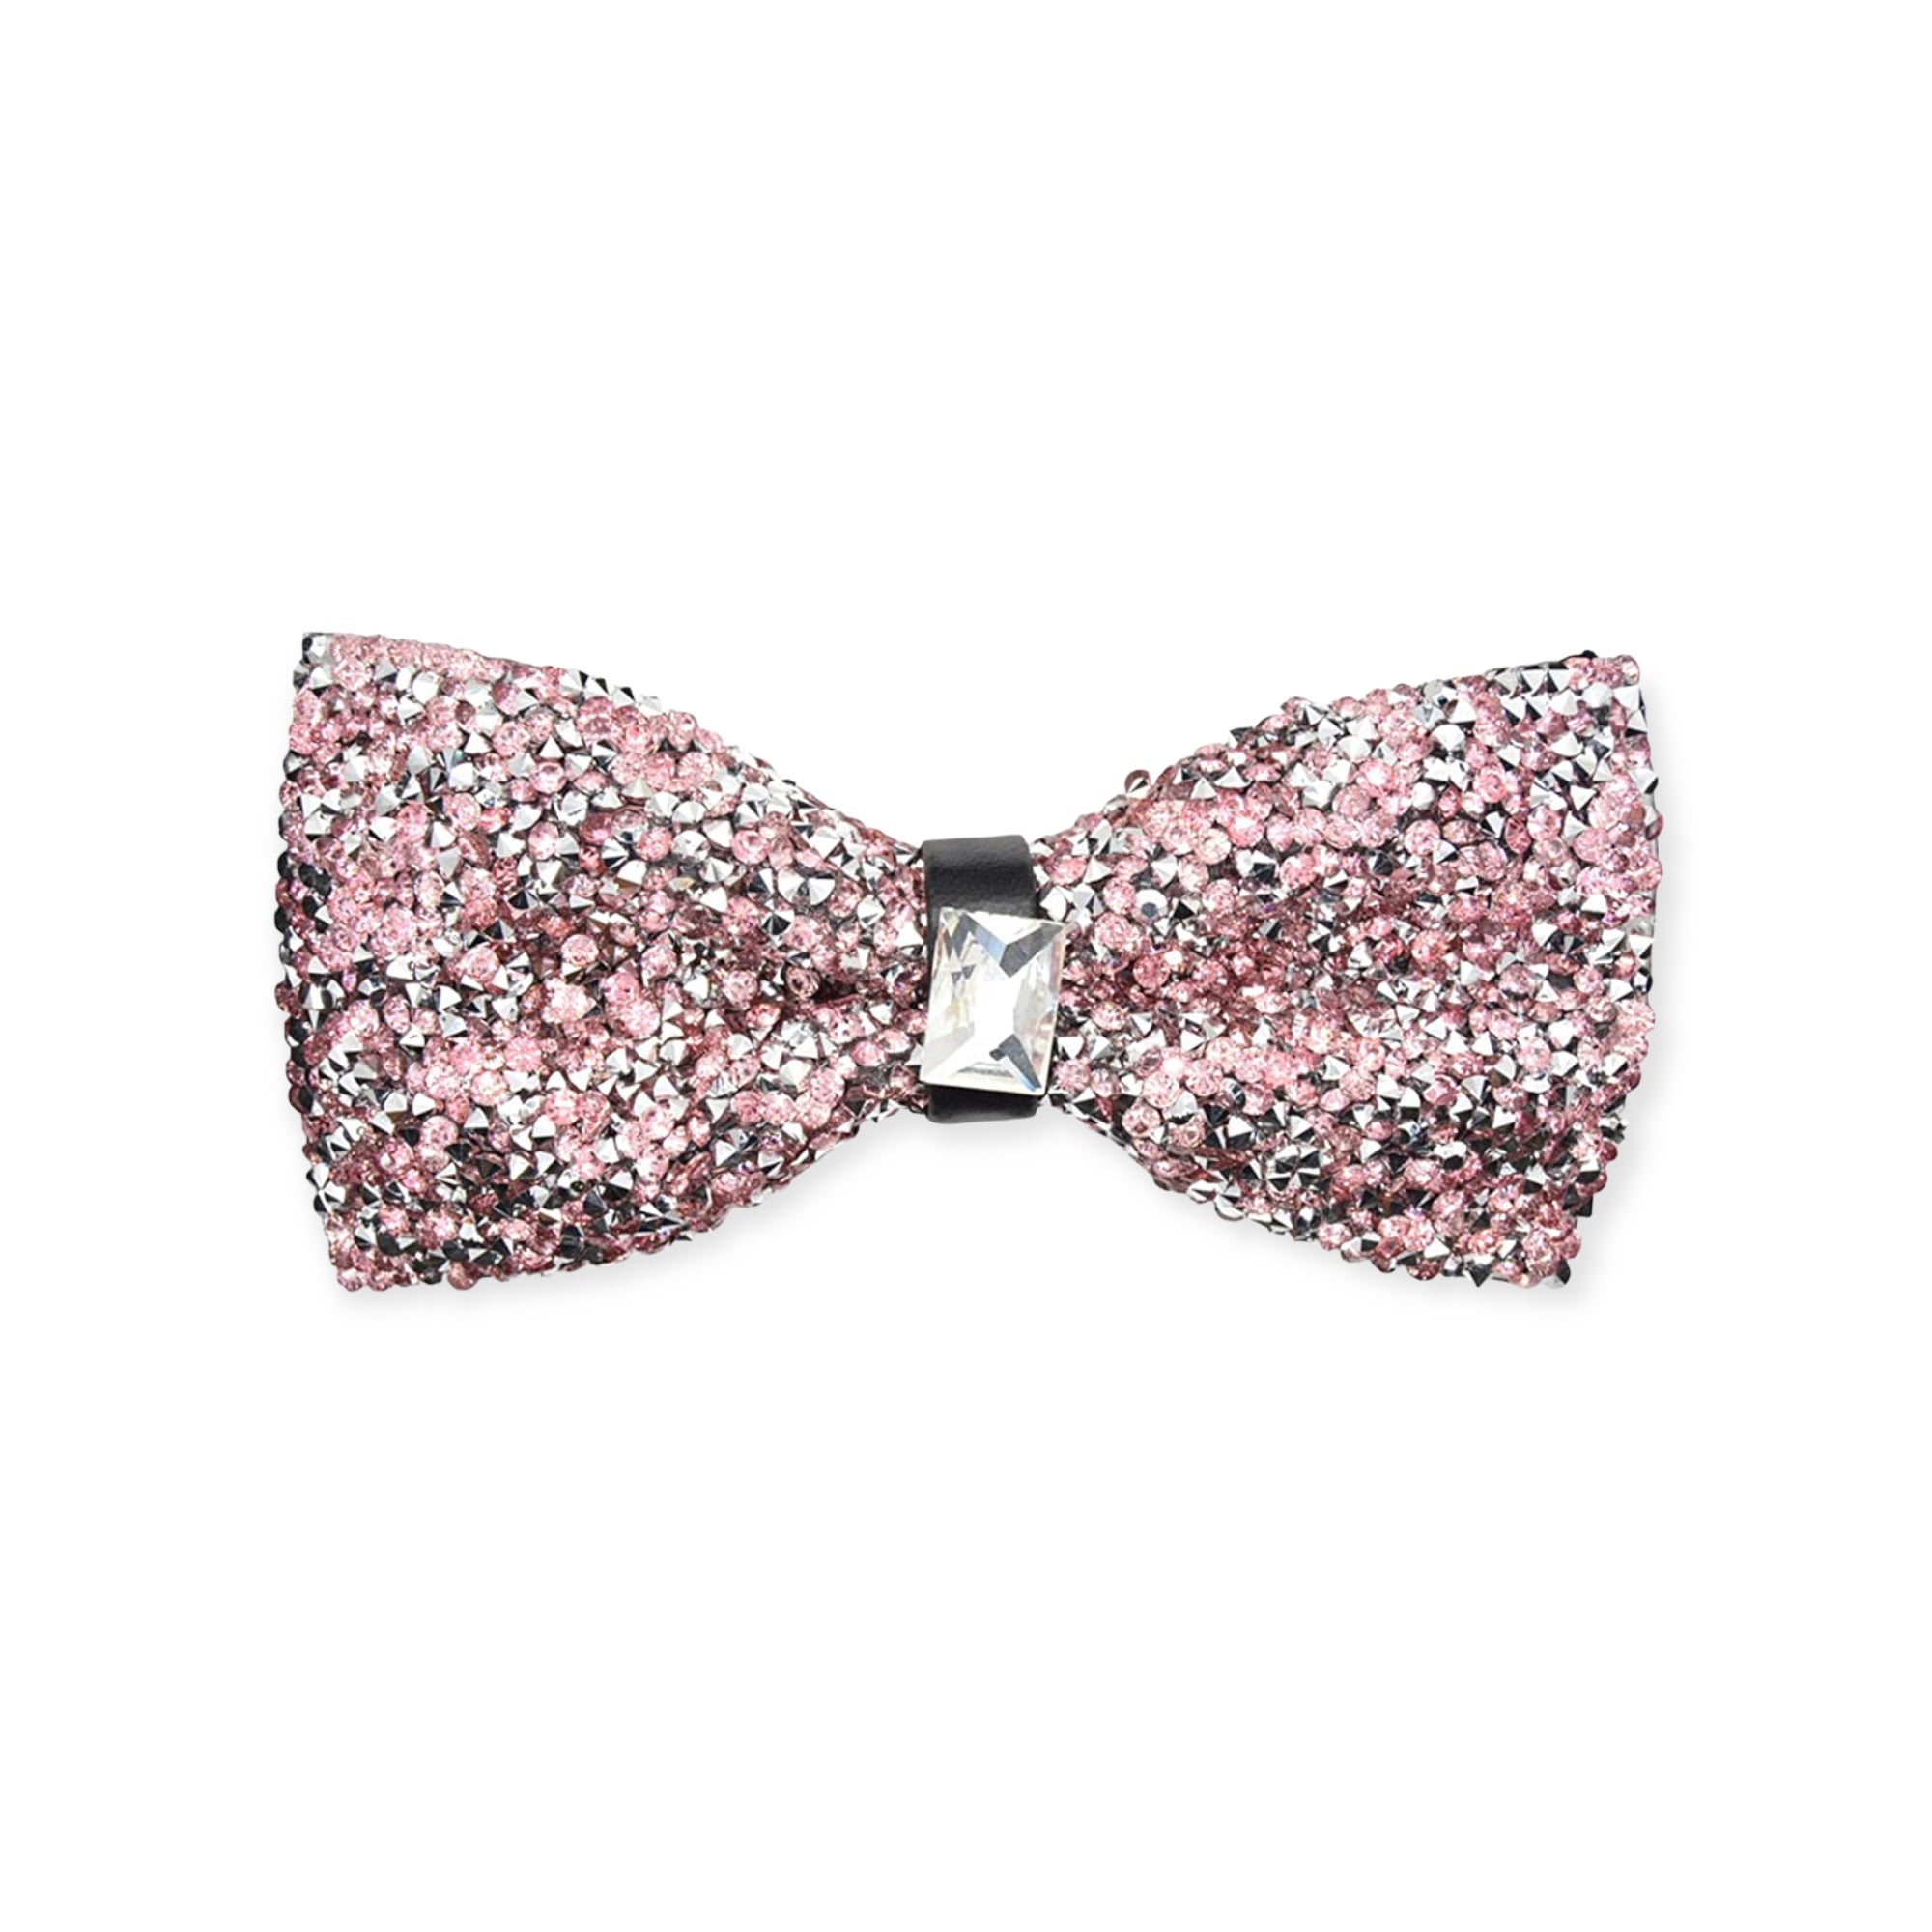 Light Pink/ Silver  Crystal Bow Tie